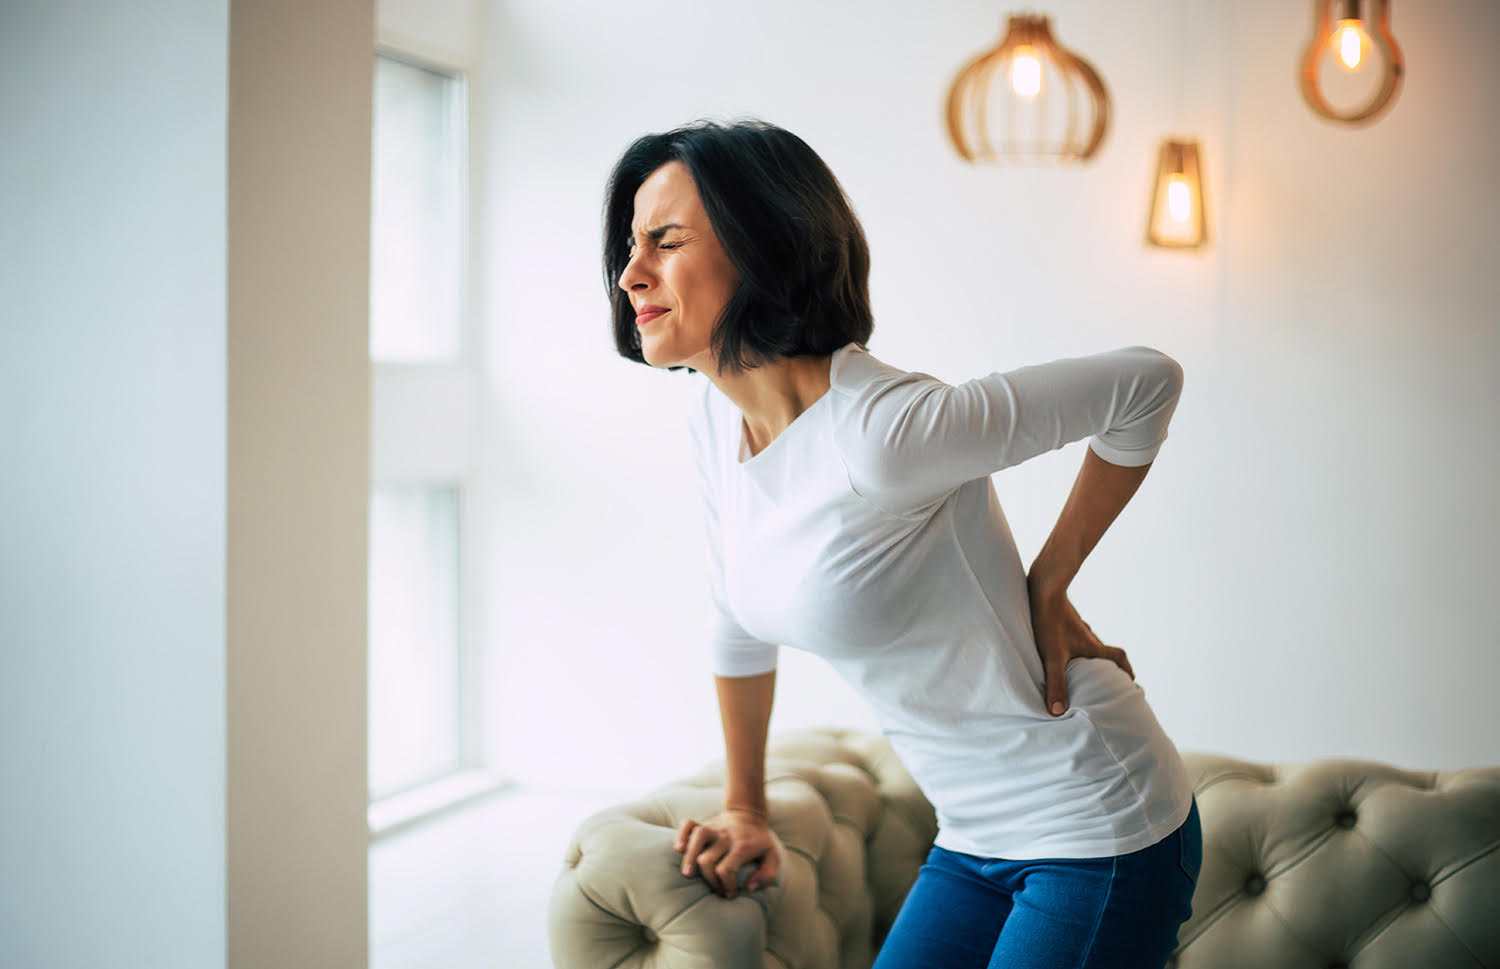 Back Pain Motion Preservation Devices Spine Fusion Surgery Alok Sharan Nj Spine And Wellness